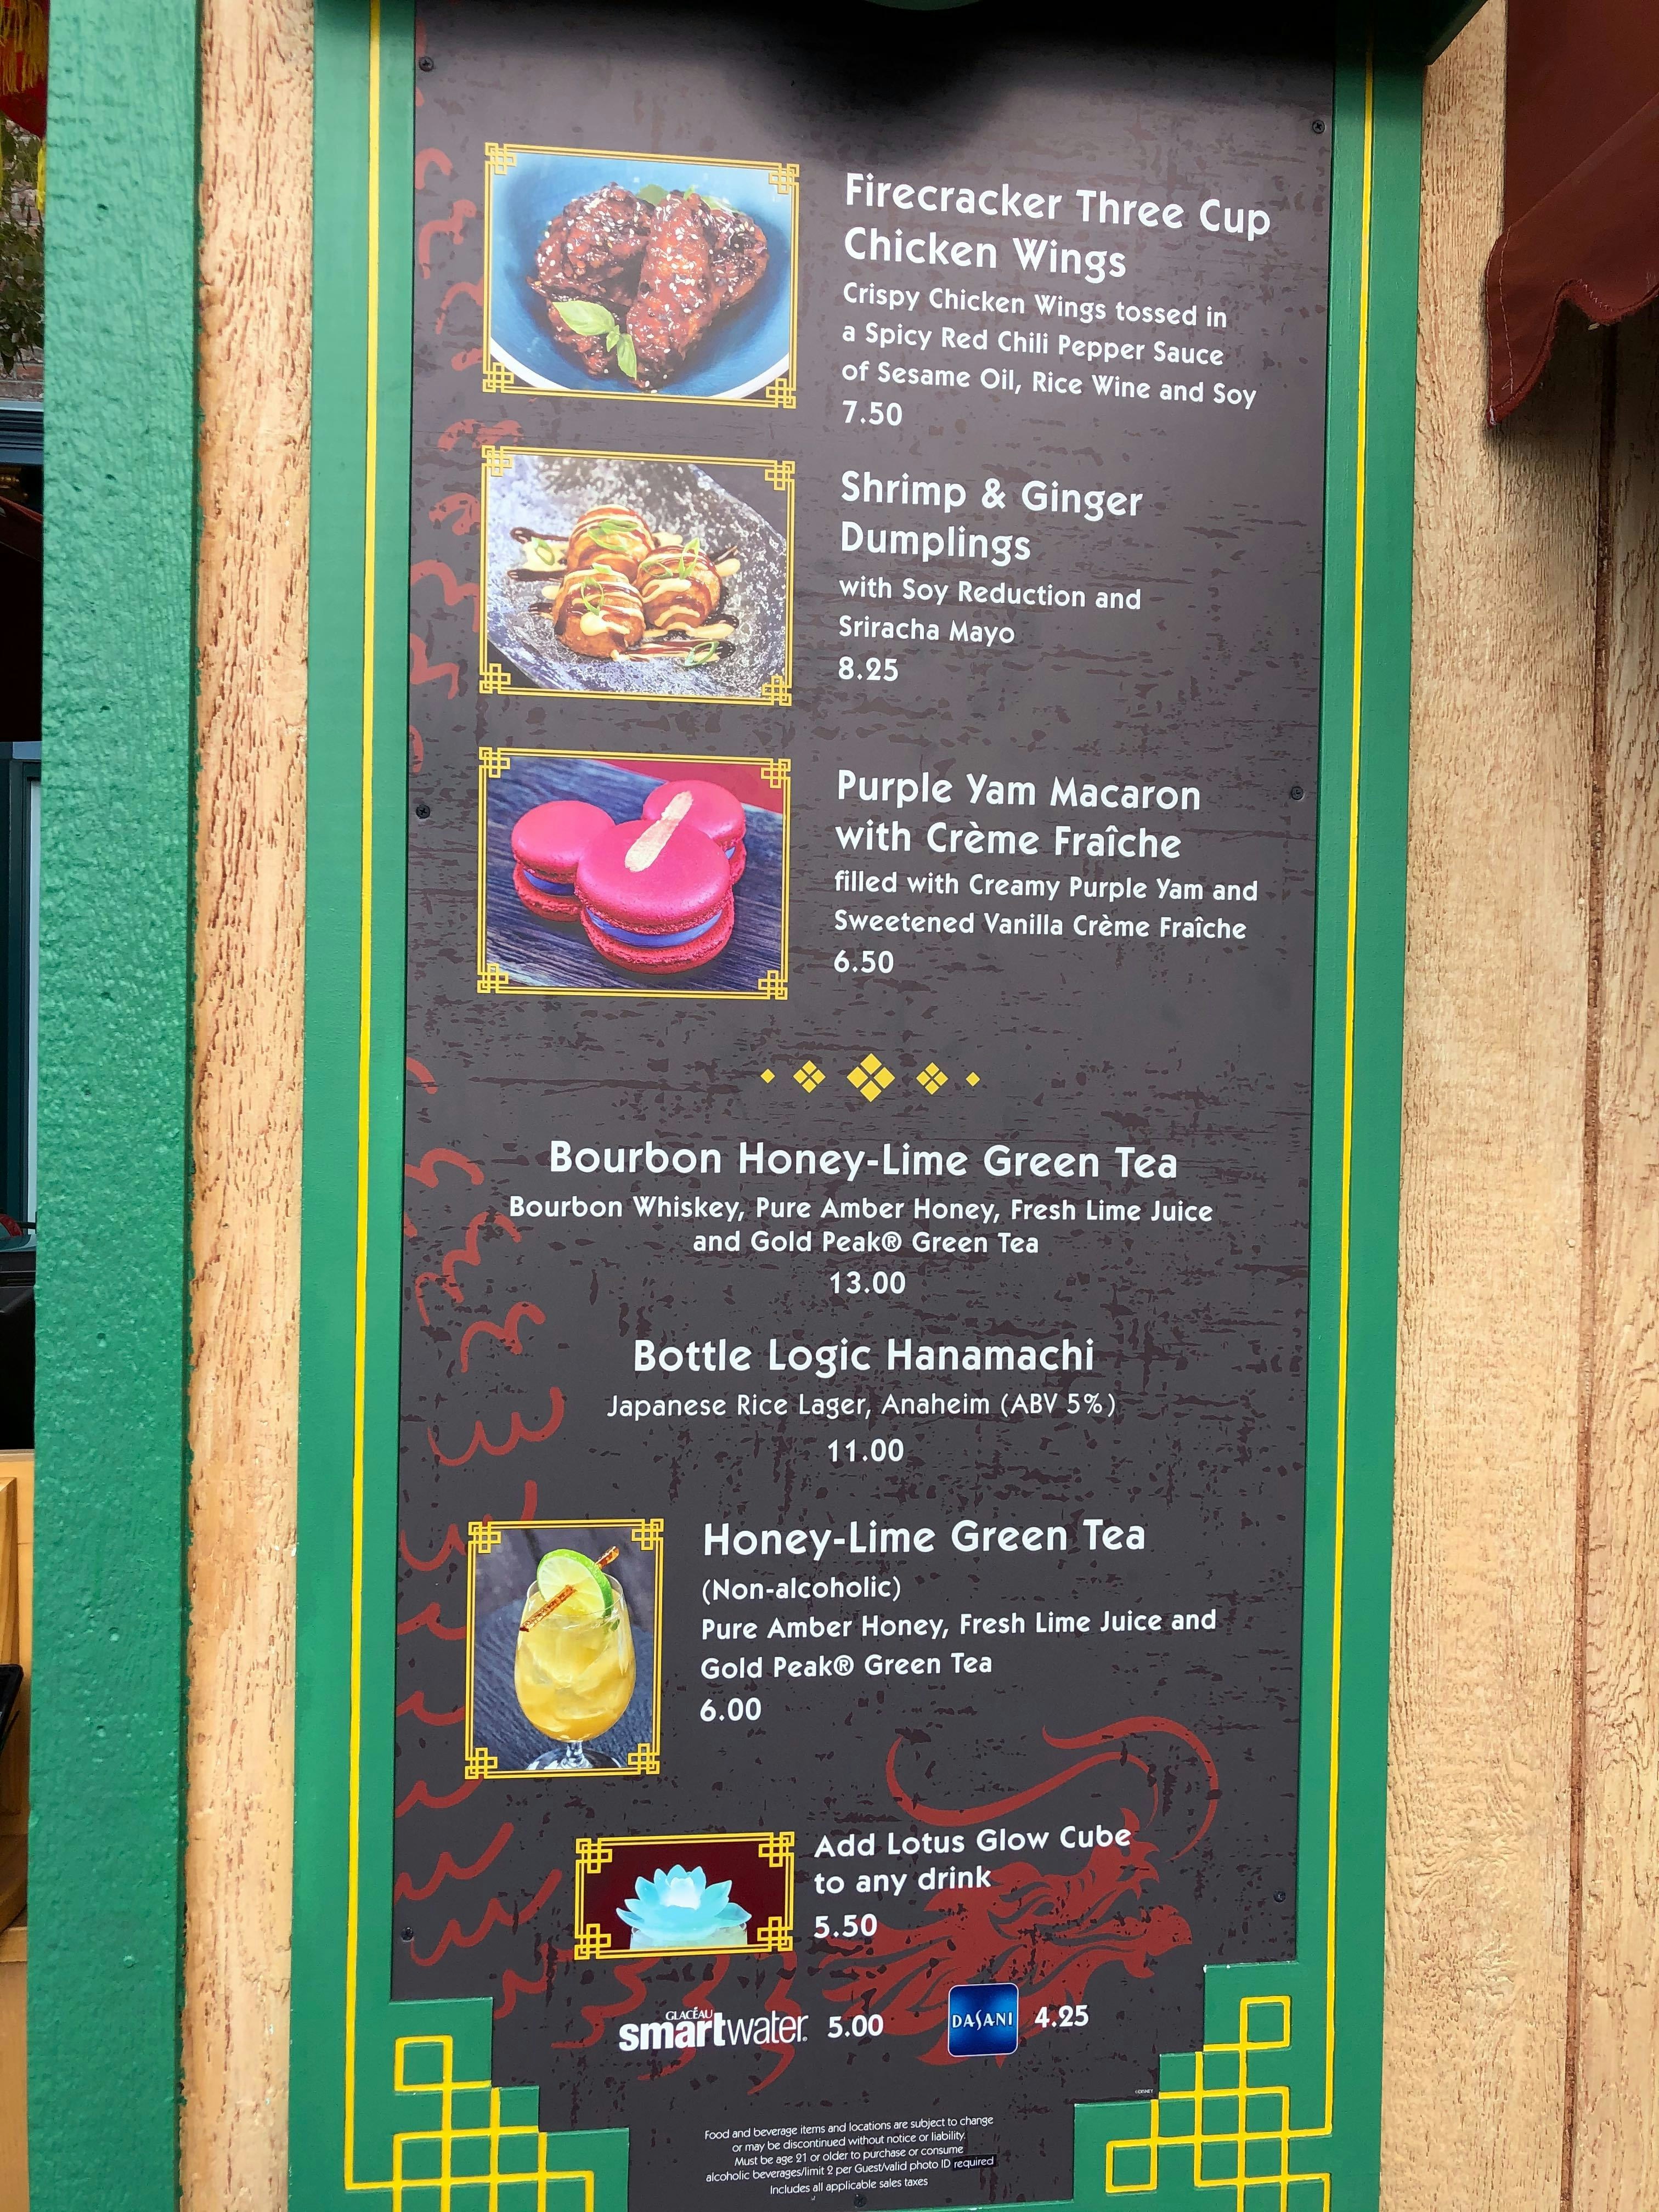 Red Dragon Spice Traders at Disney California Adventure for Lunar New Year 2020